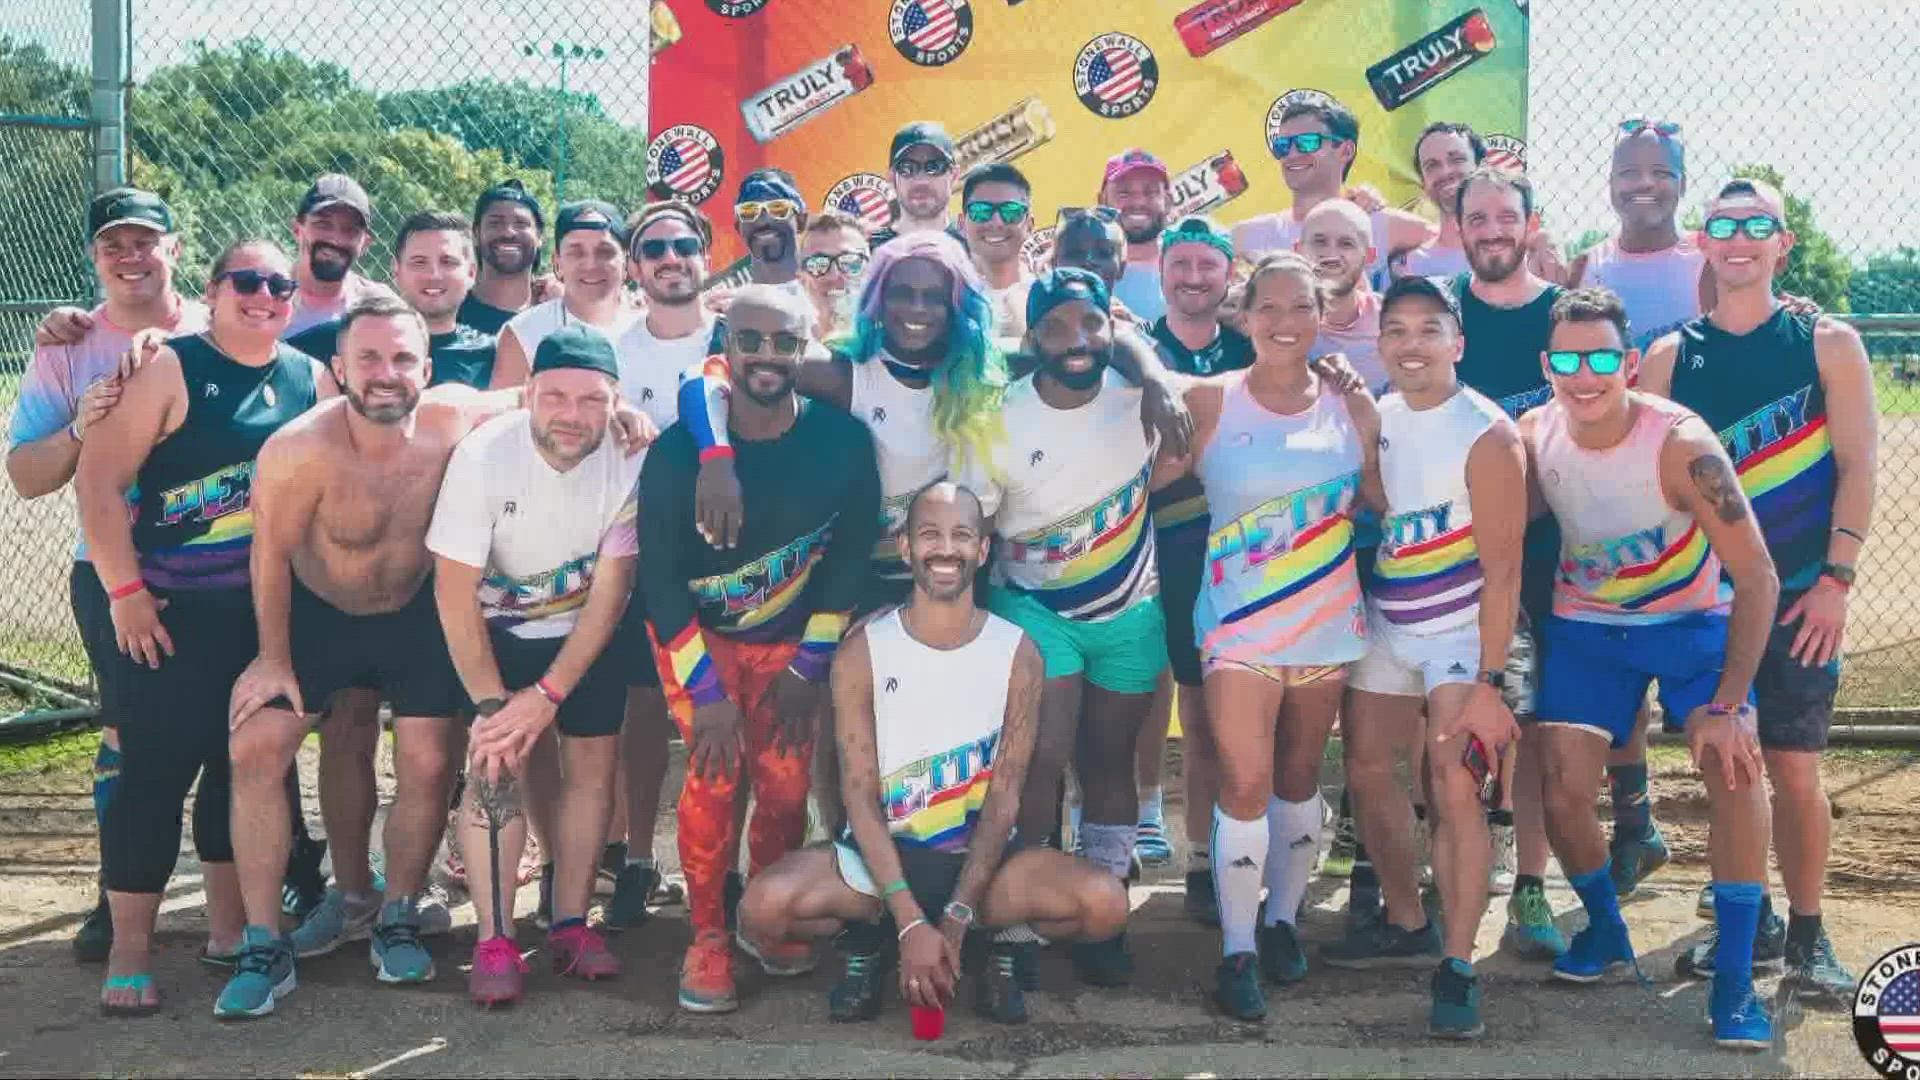 With over 1,600 participants set to compete, all LGBTQ+ and allies are invited for a fun weekend July 8-10.